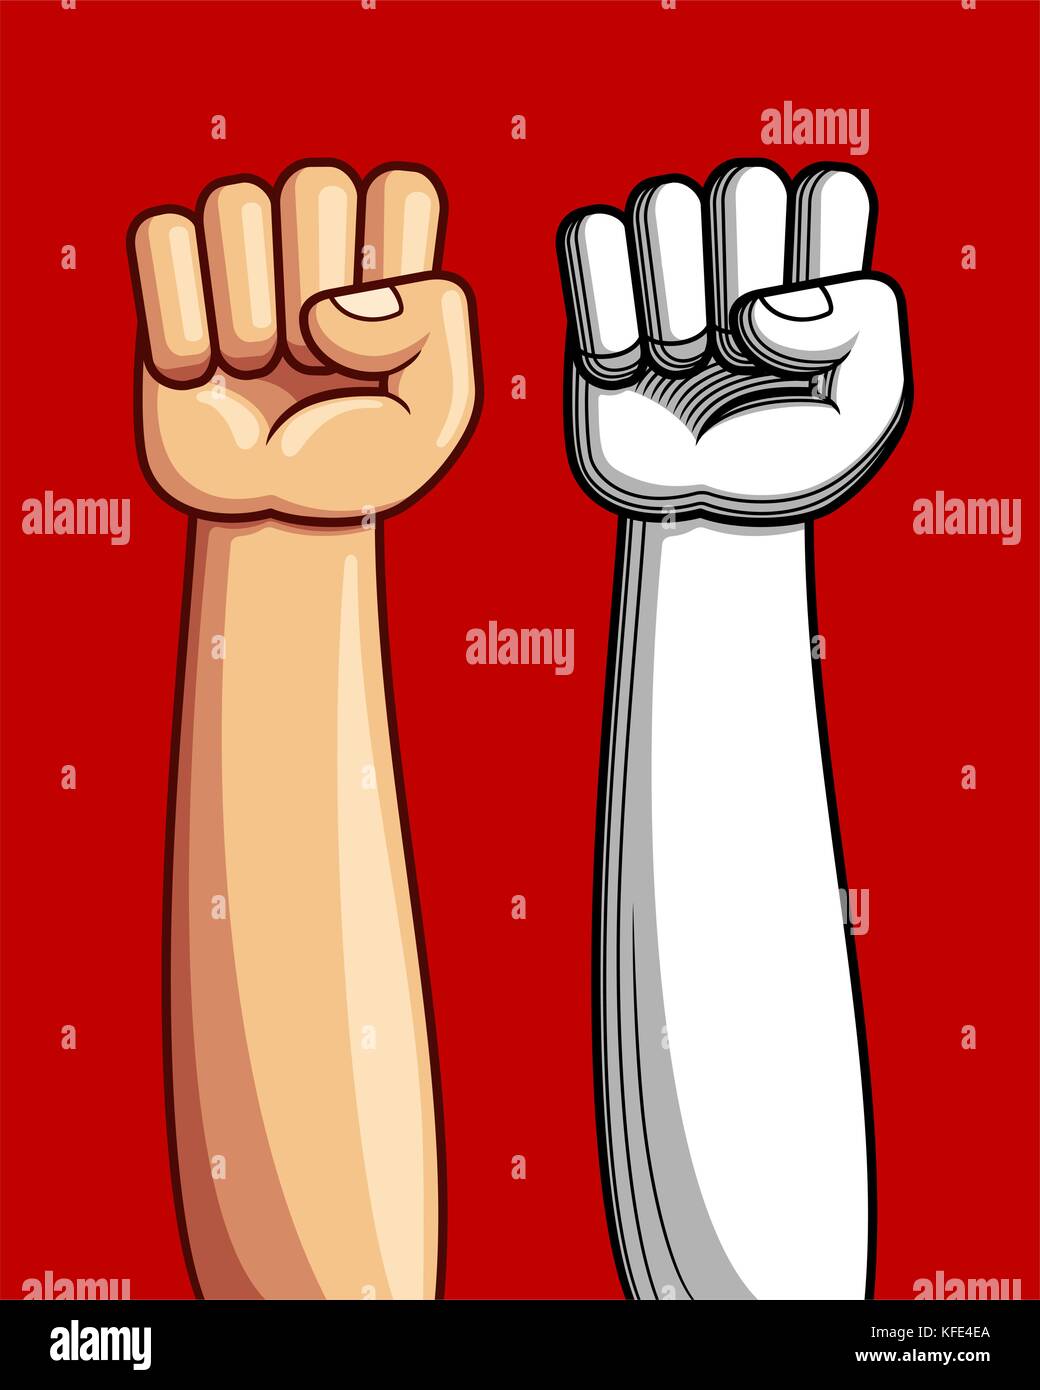 clenched fist vector illustration for resistance and revolution symbol Stock Vector